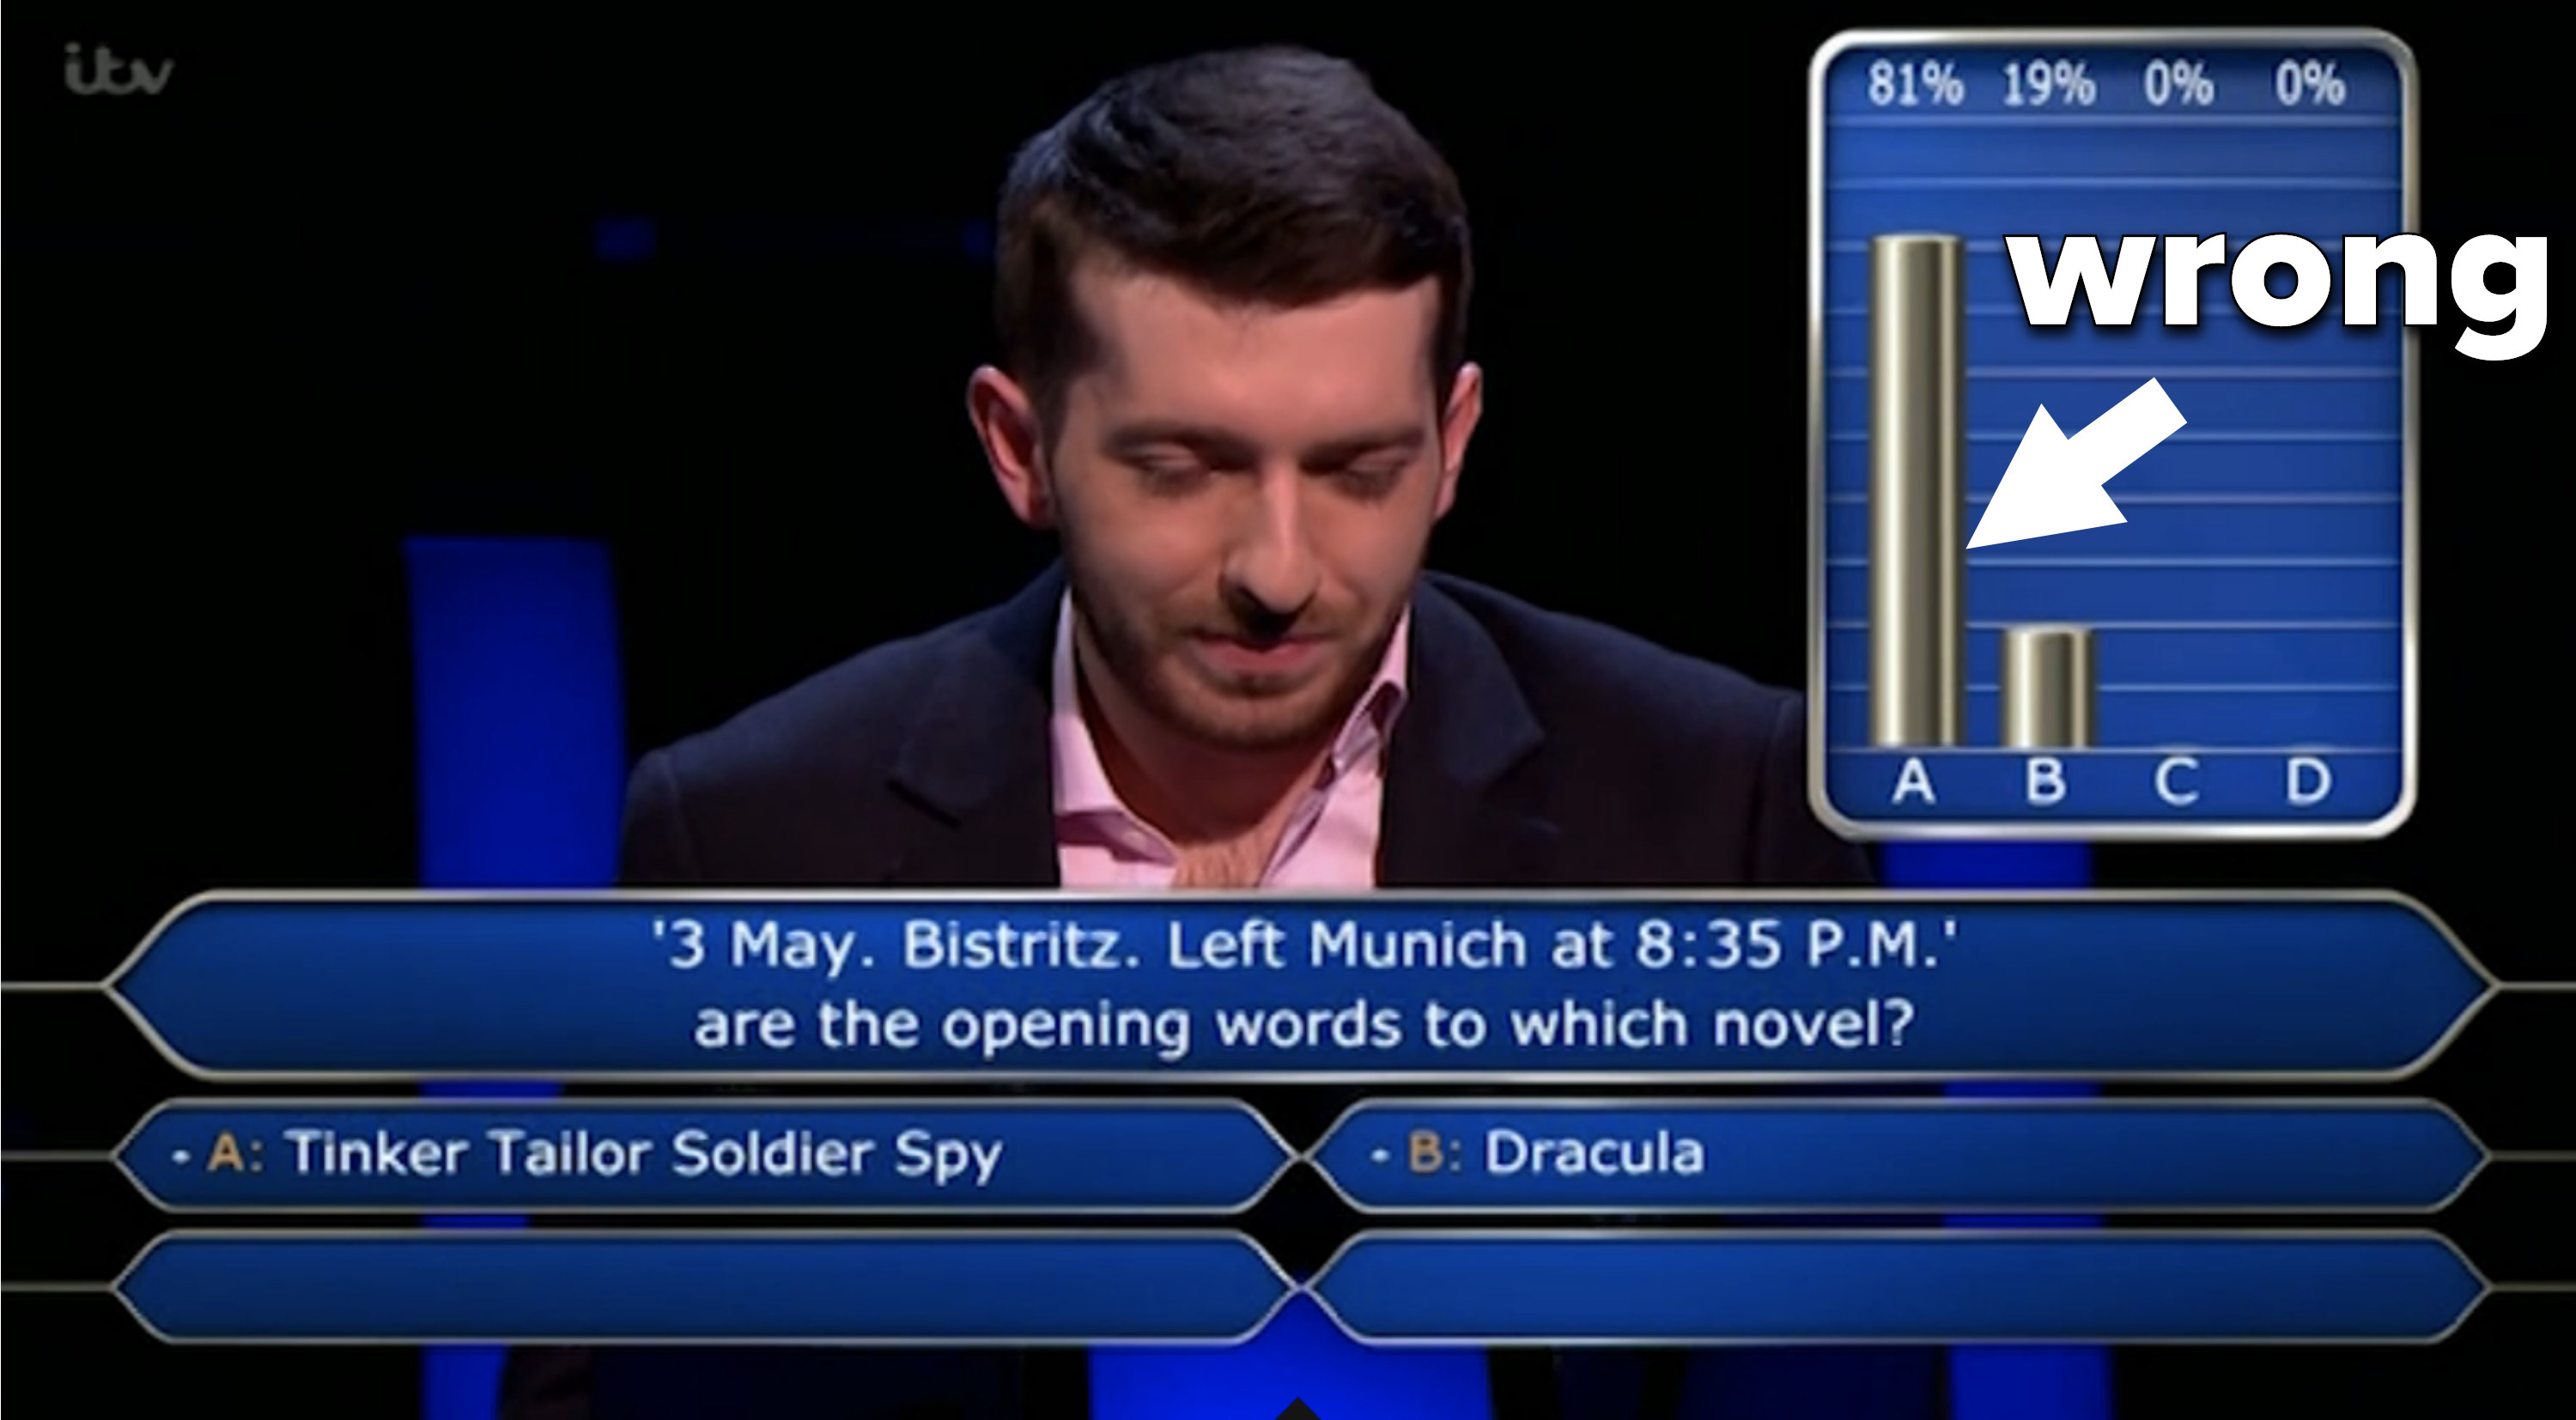 A Who Wants To Be A Millionaire contestant looking at a poll the audience result that is incorrect